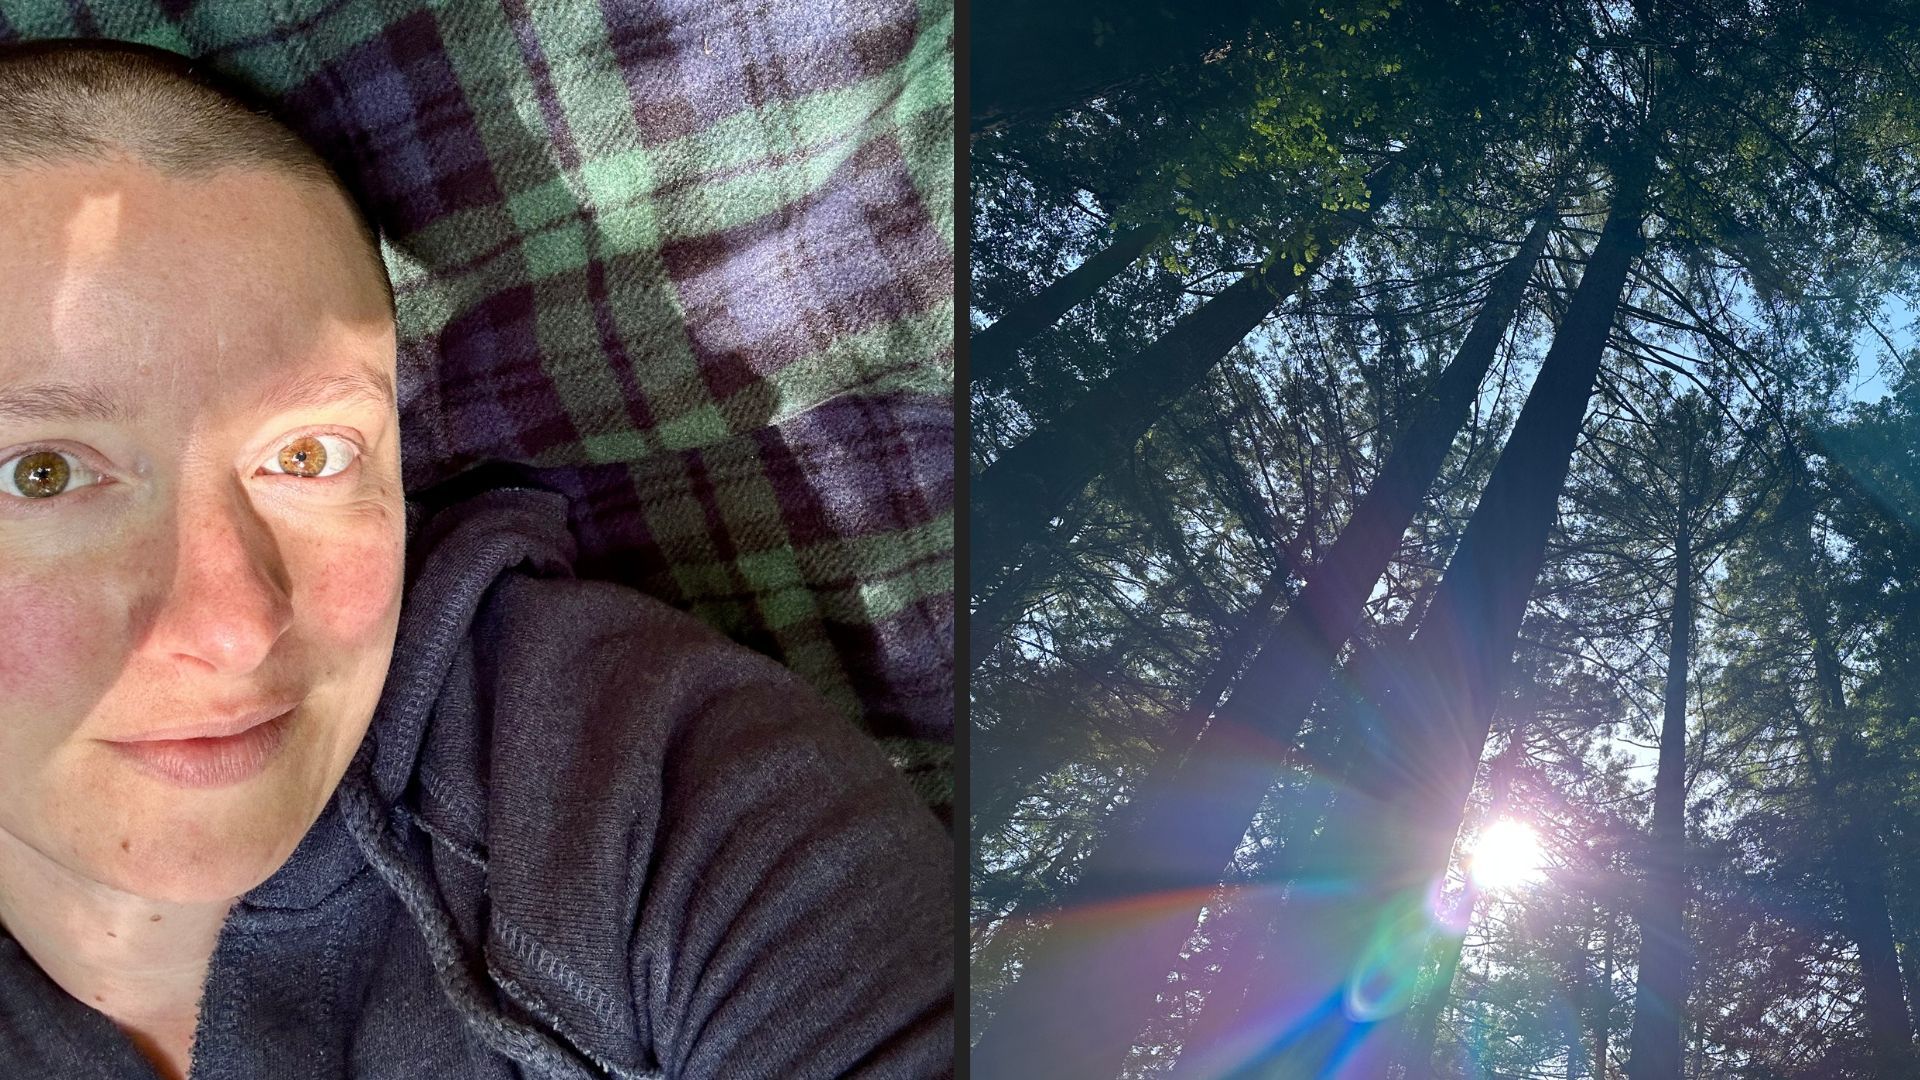 in the left image, a woman with a shaved head and hazel eyes stares at the camera from a blanket. in the right image, sun filters through redwoods.